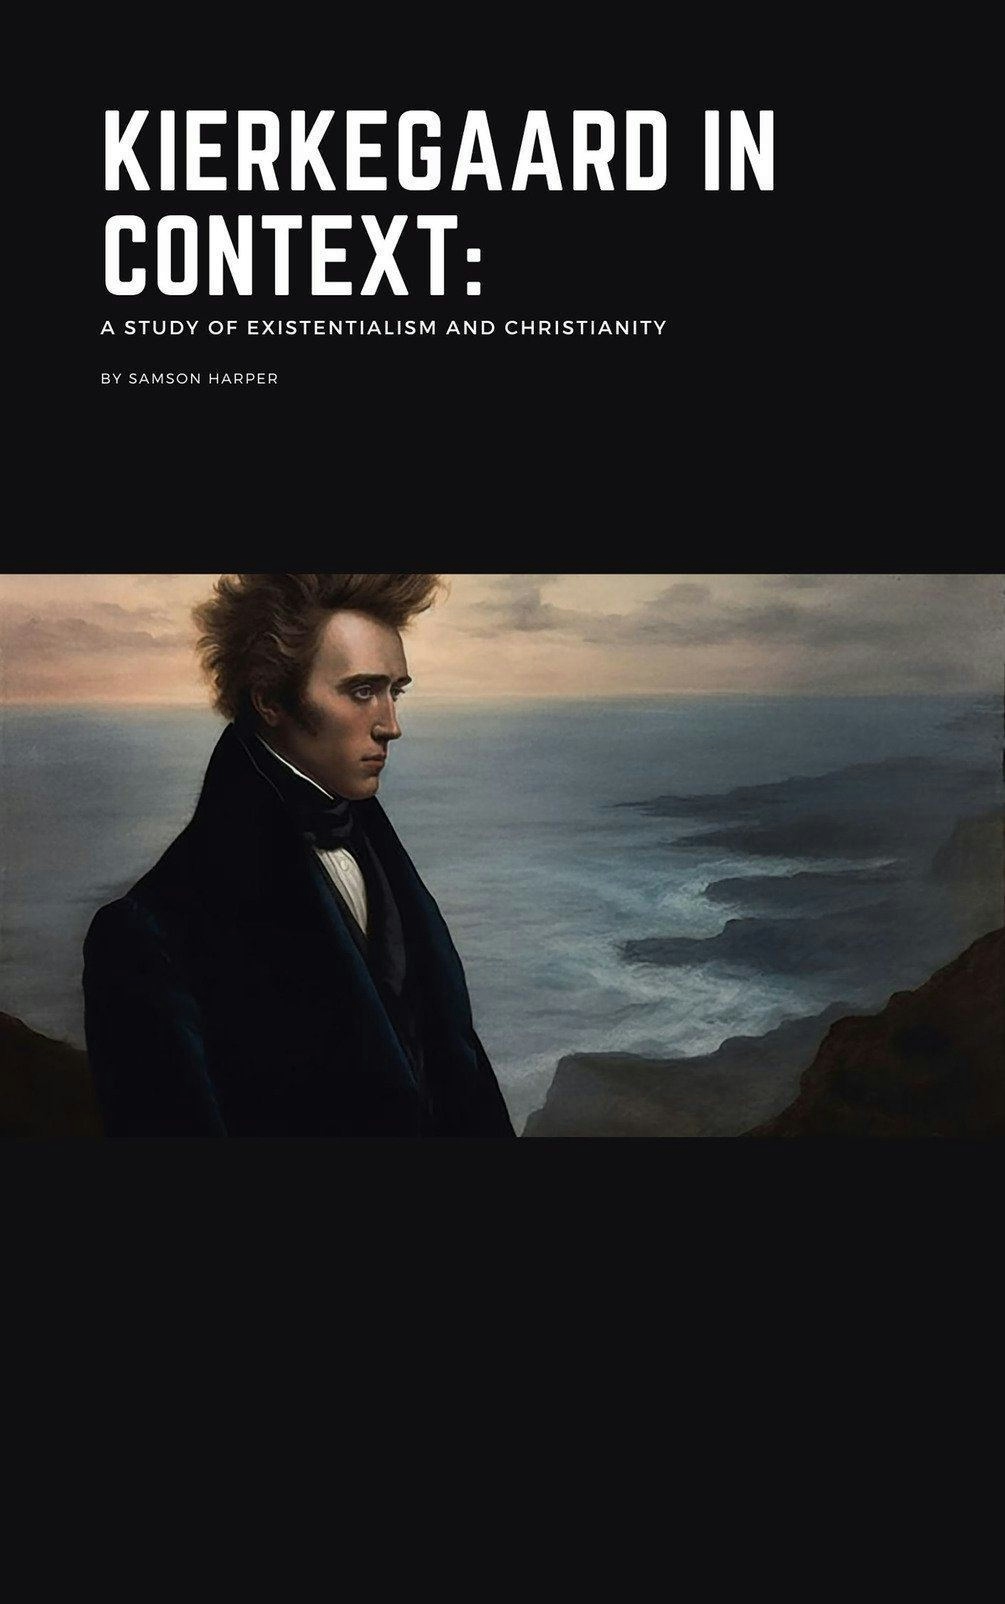 Kierkegaard in Context: A Study of Existentialism and Christianity